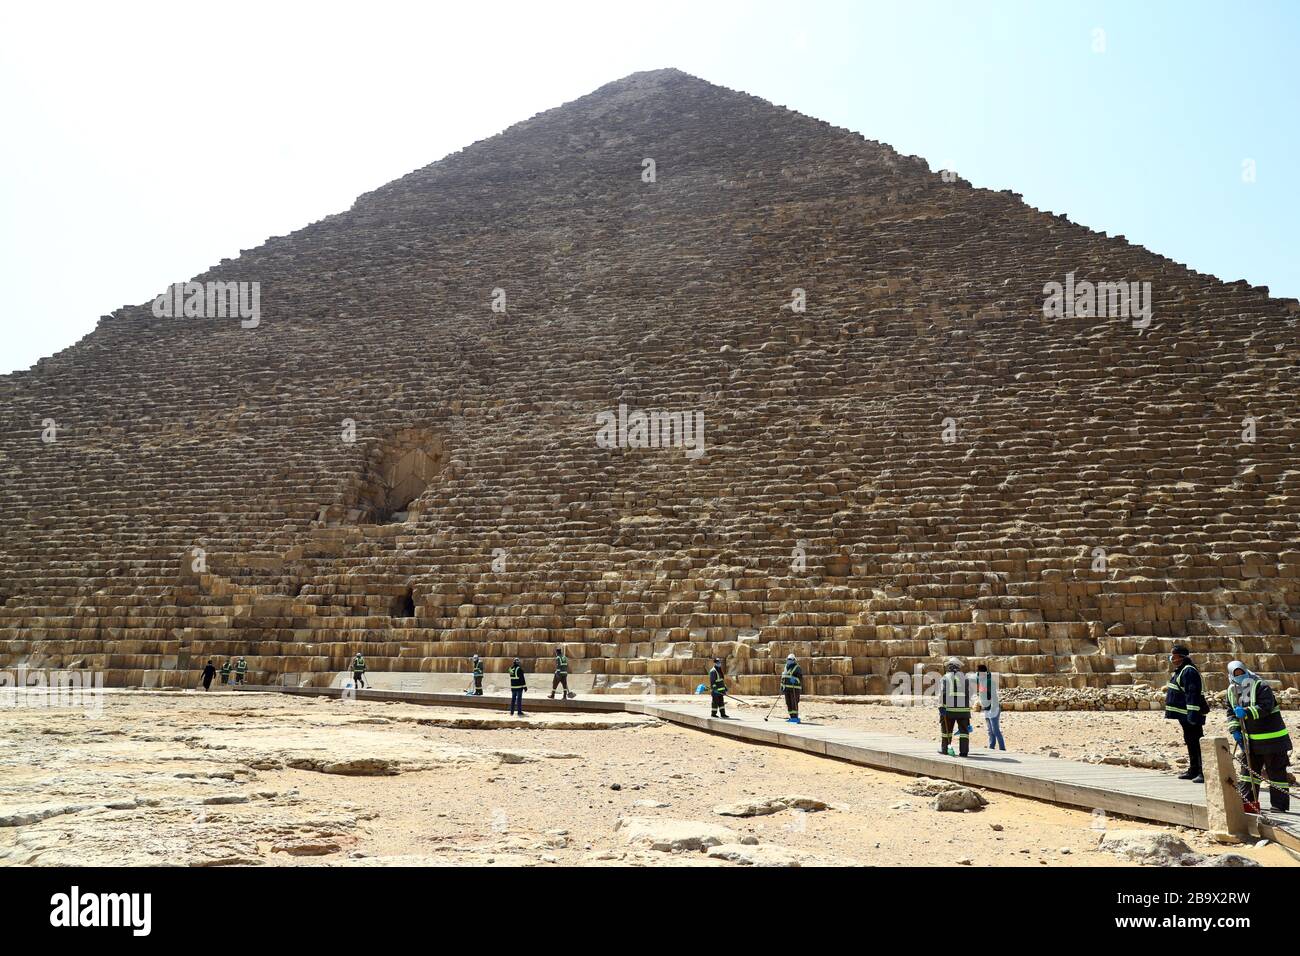 (200325) -- GIZA, March 25, 2020 (Xinhua) -- Staff members clean near the Pyramids in Giza, Egypt, March 25, 2020. Egypt announced on Tuesday that one COVID-19 case died and 36 new cases were detected, bringing the total number of cases in the country to 402. (Xinhua/Ahmed Gomaa) Stock Photo